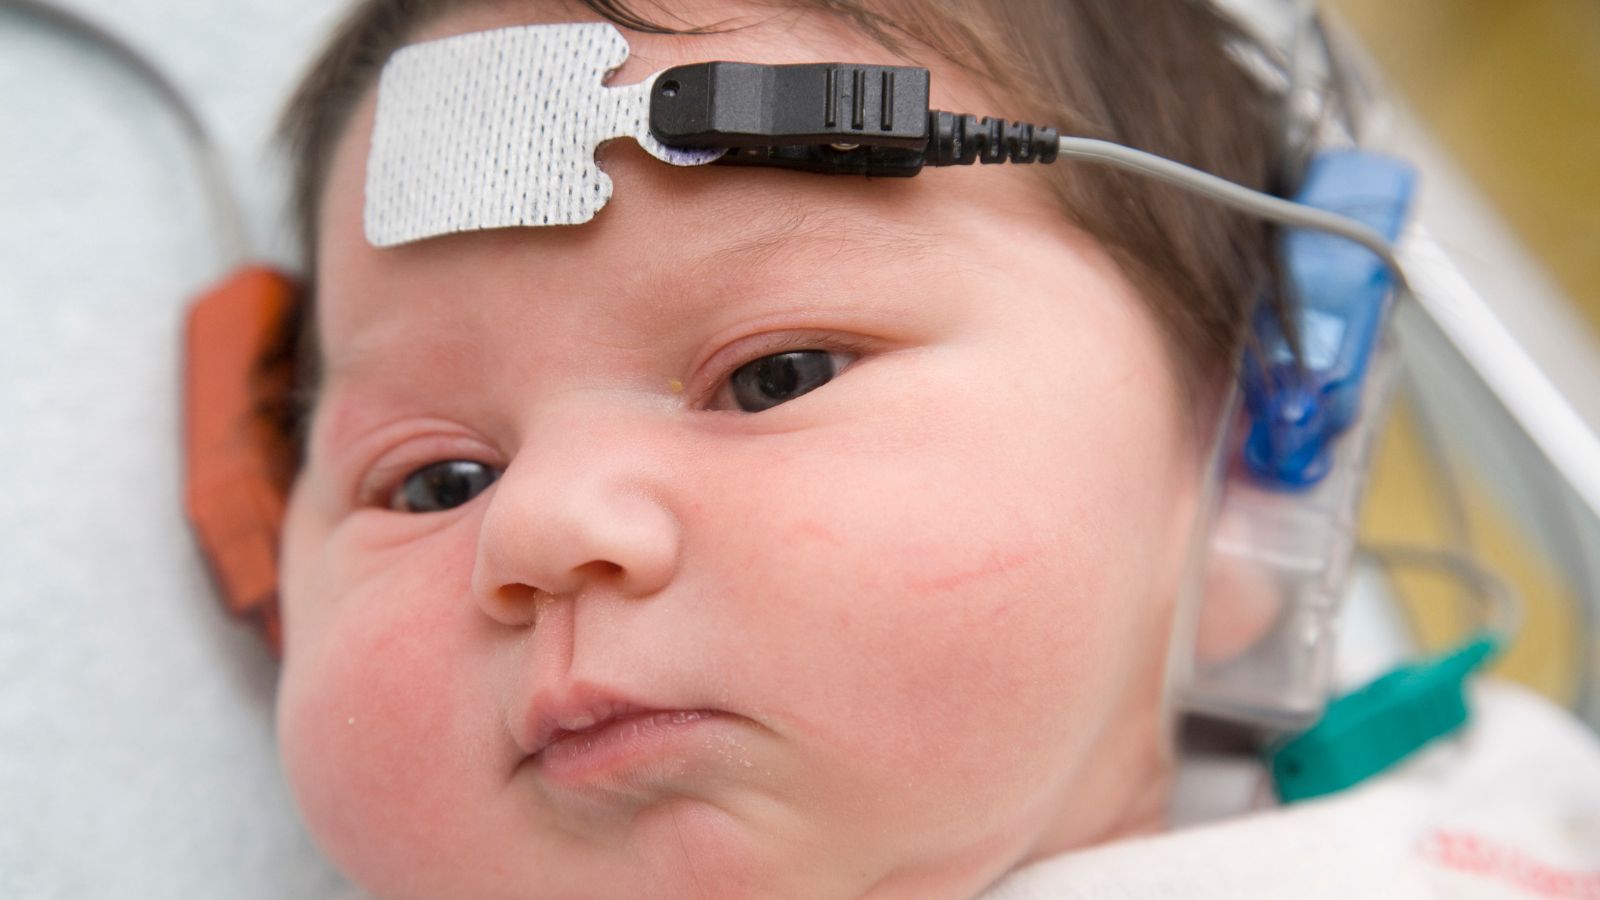 Newborn hearing screenings, other services bolstered by new grant...